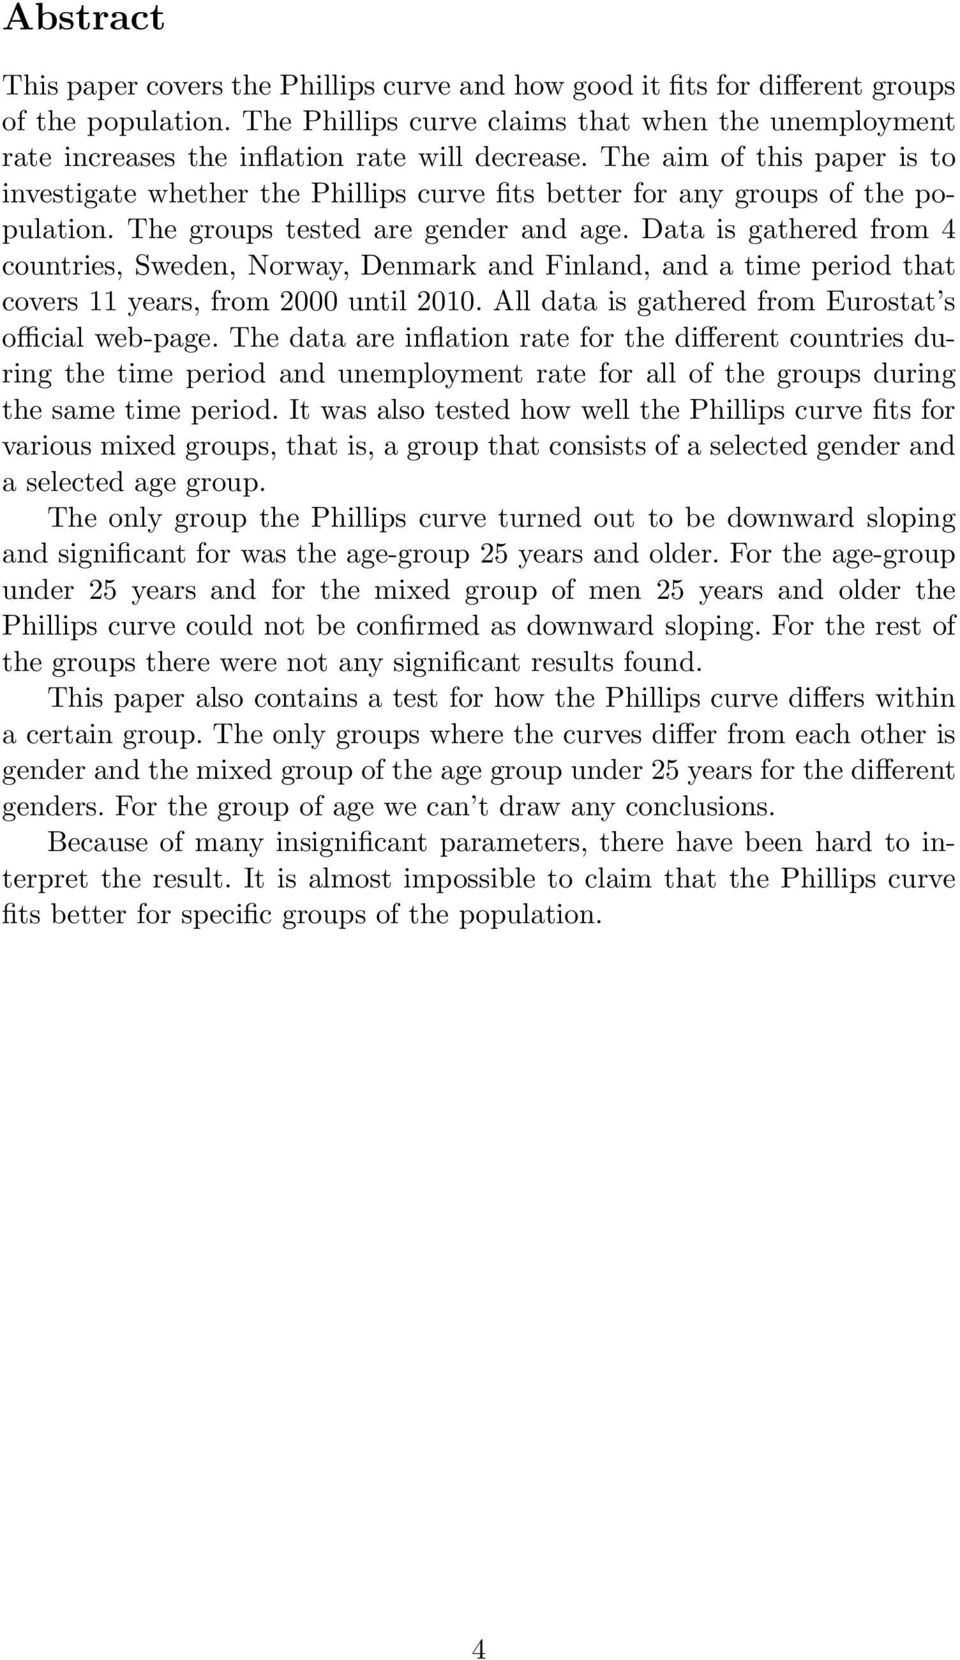 The aim of this paper is to investigate whether the Phillips curve fits better for any groups of the population. The groups tested are gender and age.